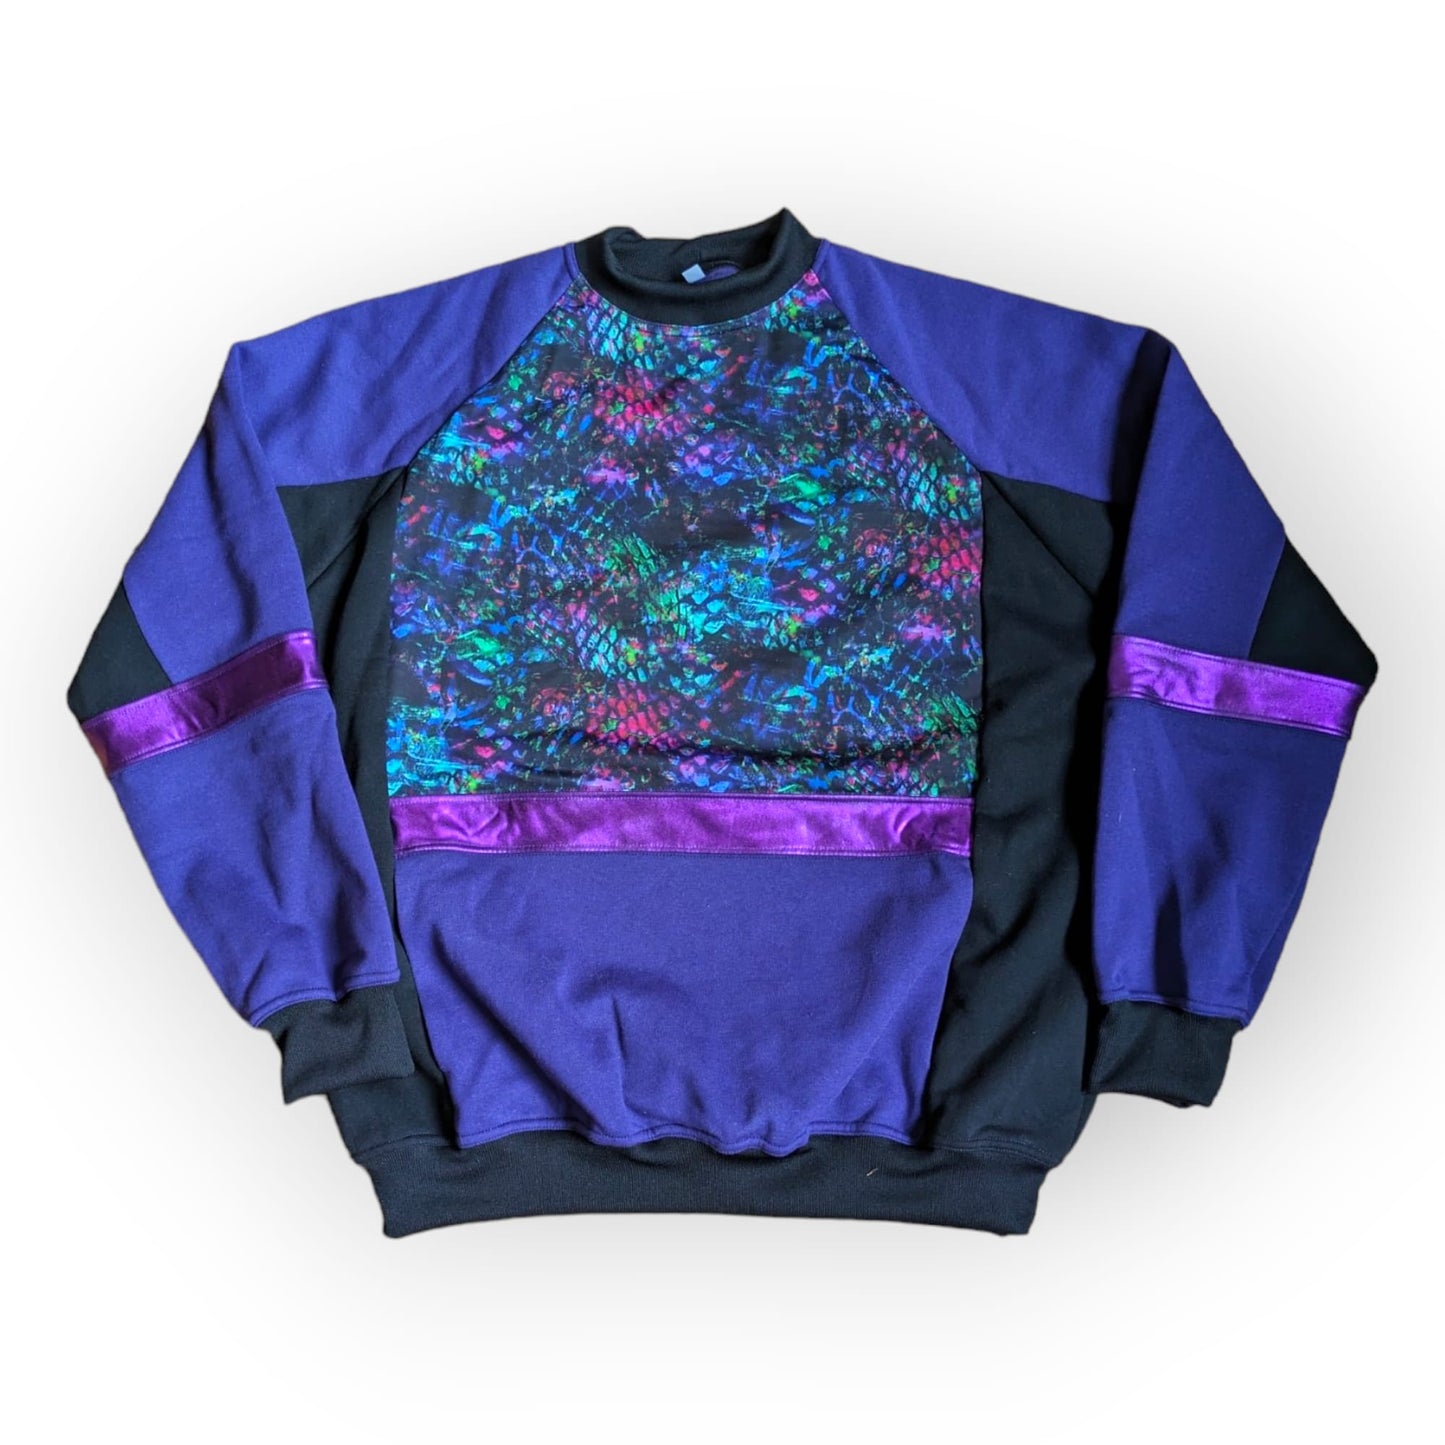 Flat front view of the Purple Snakebite Sweatshirt, a limited edition, off-the-peg piece in purple and black sweatshirt fleece with blue/green/pink snakebite print spandex details. The unisex design features a raglan sleeve, a large front pouch pocket, printed spandex chest panel and pink foiled stripes.